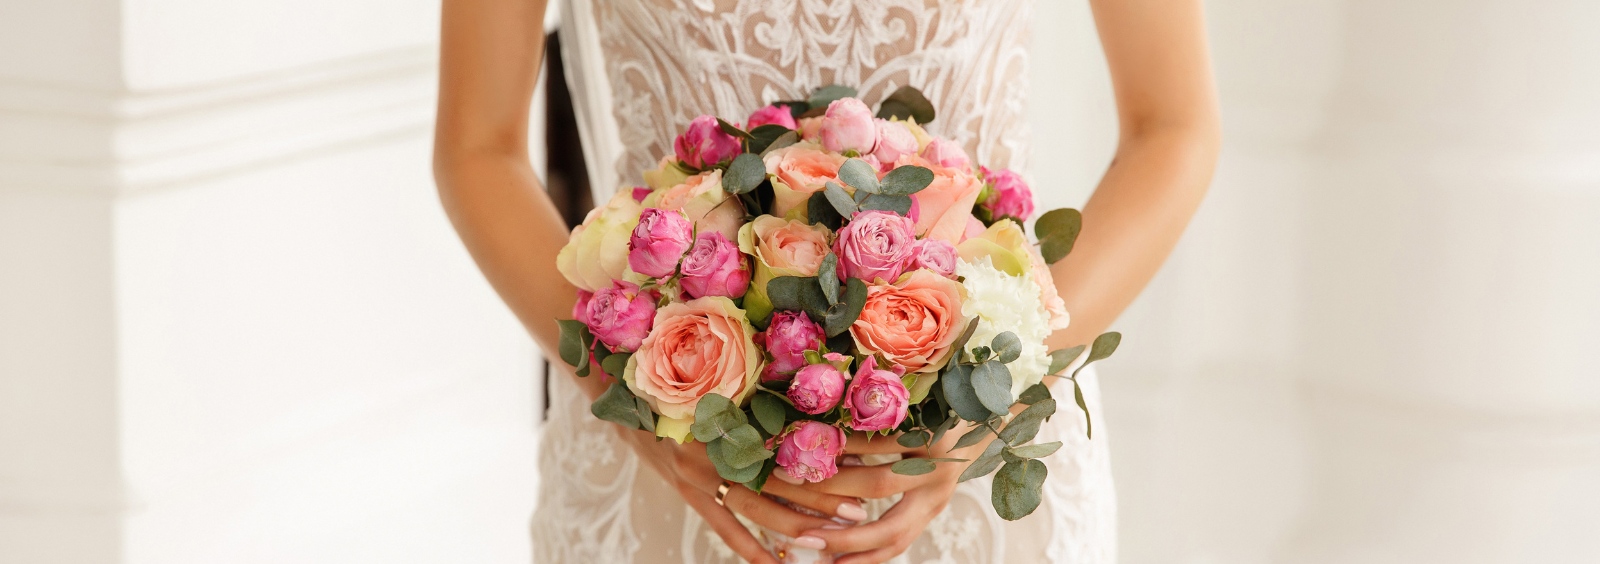 A bride holding flowers in front of her dress.